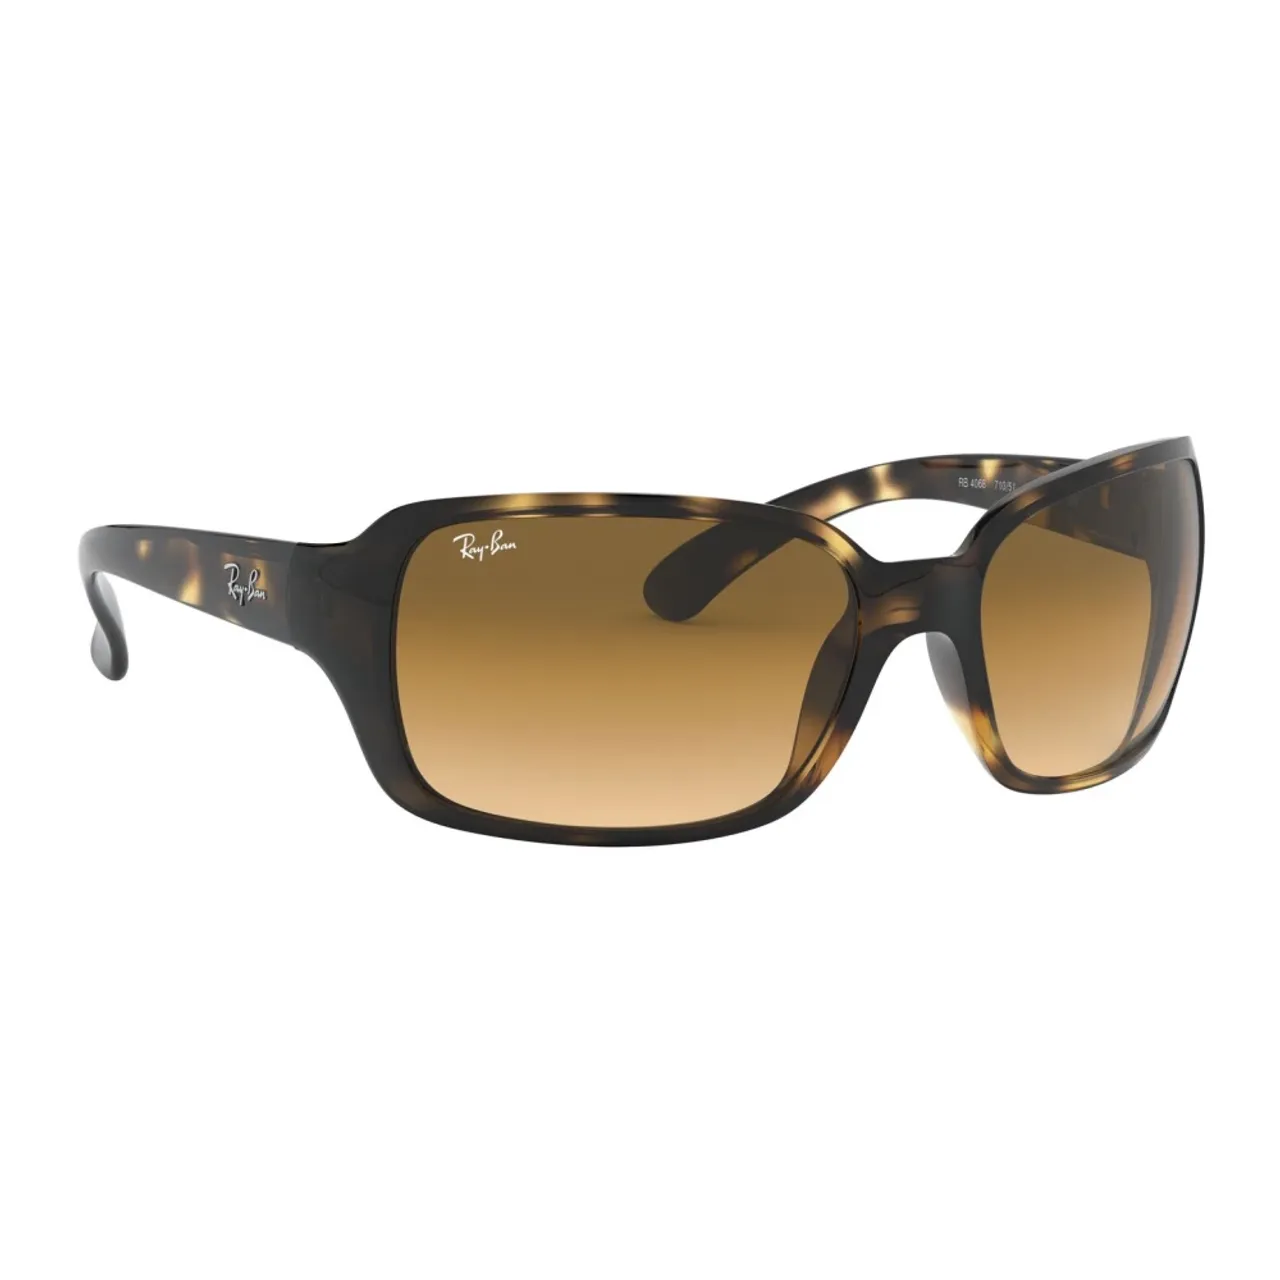 Ray-Ban , Elegant Sunglasses with Light Havana Frame and Brown Gradient Lenses ,Brown female, Sizes: